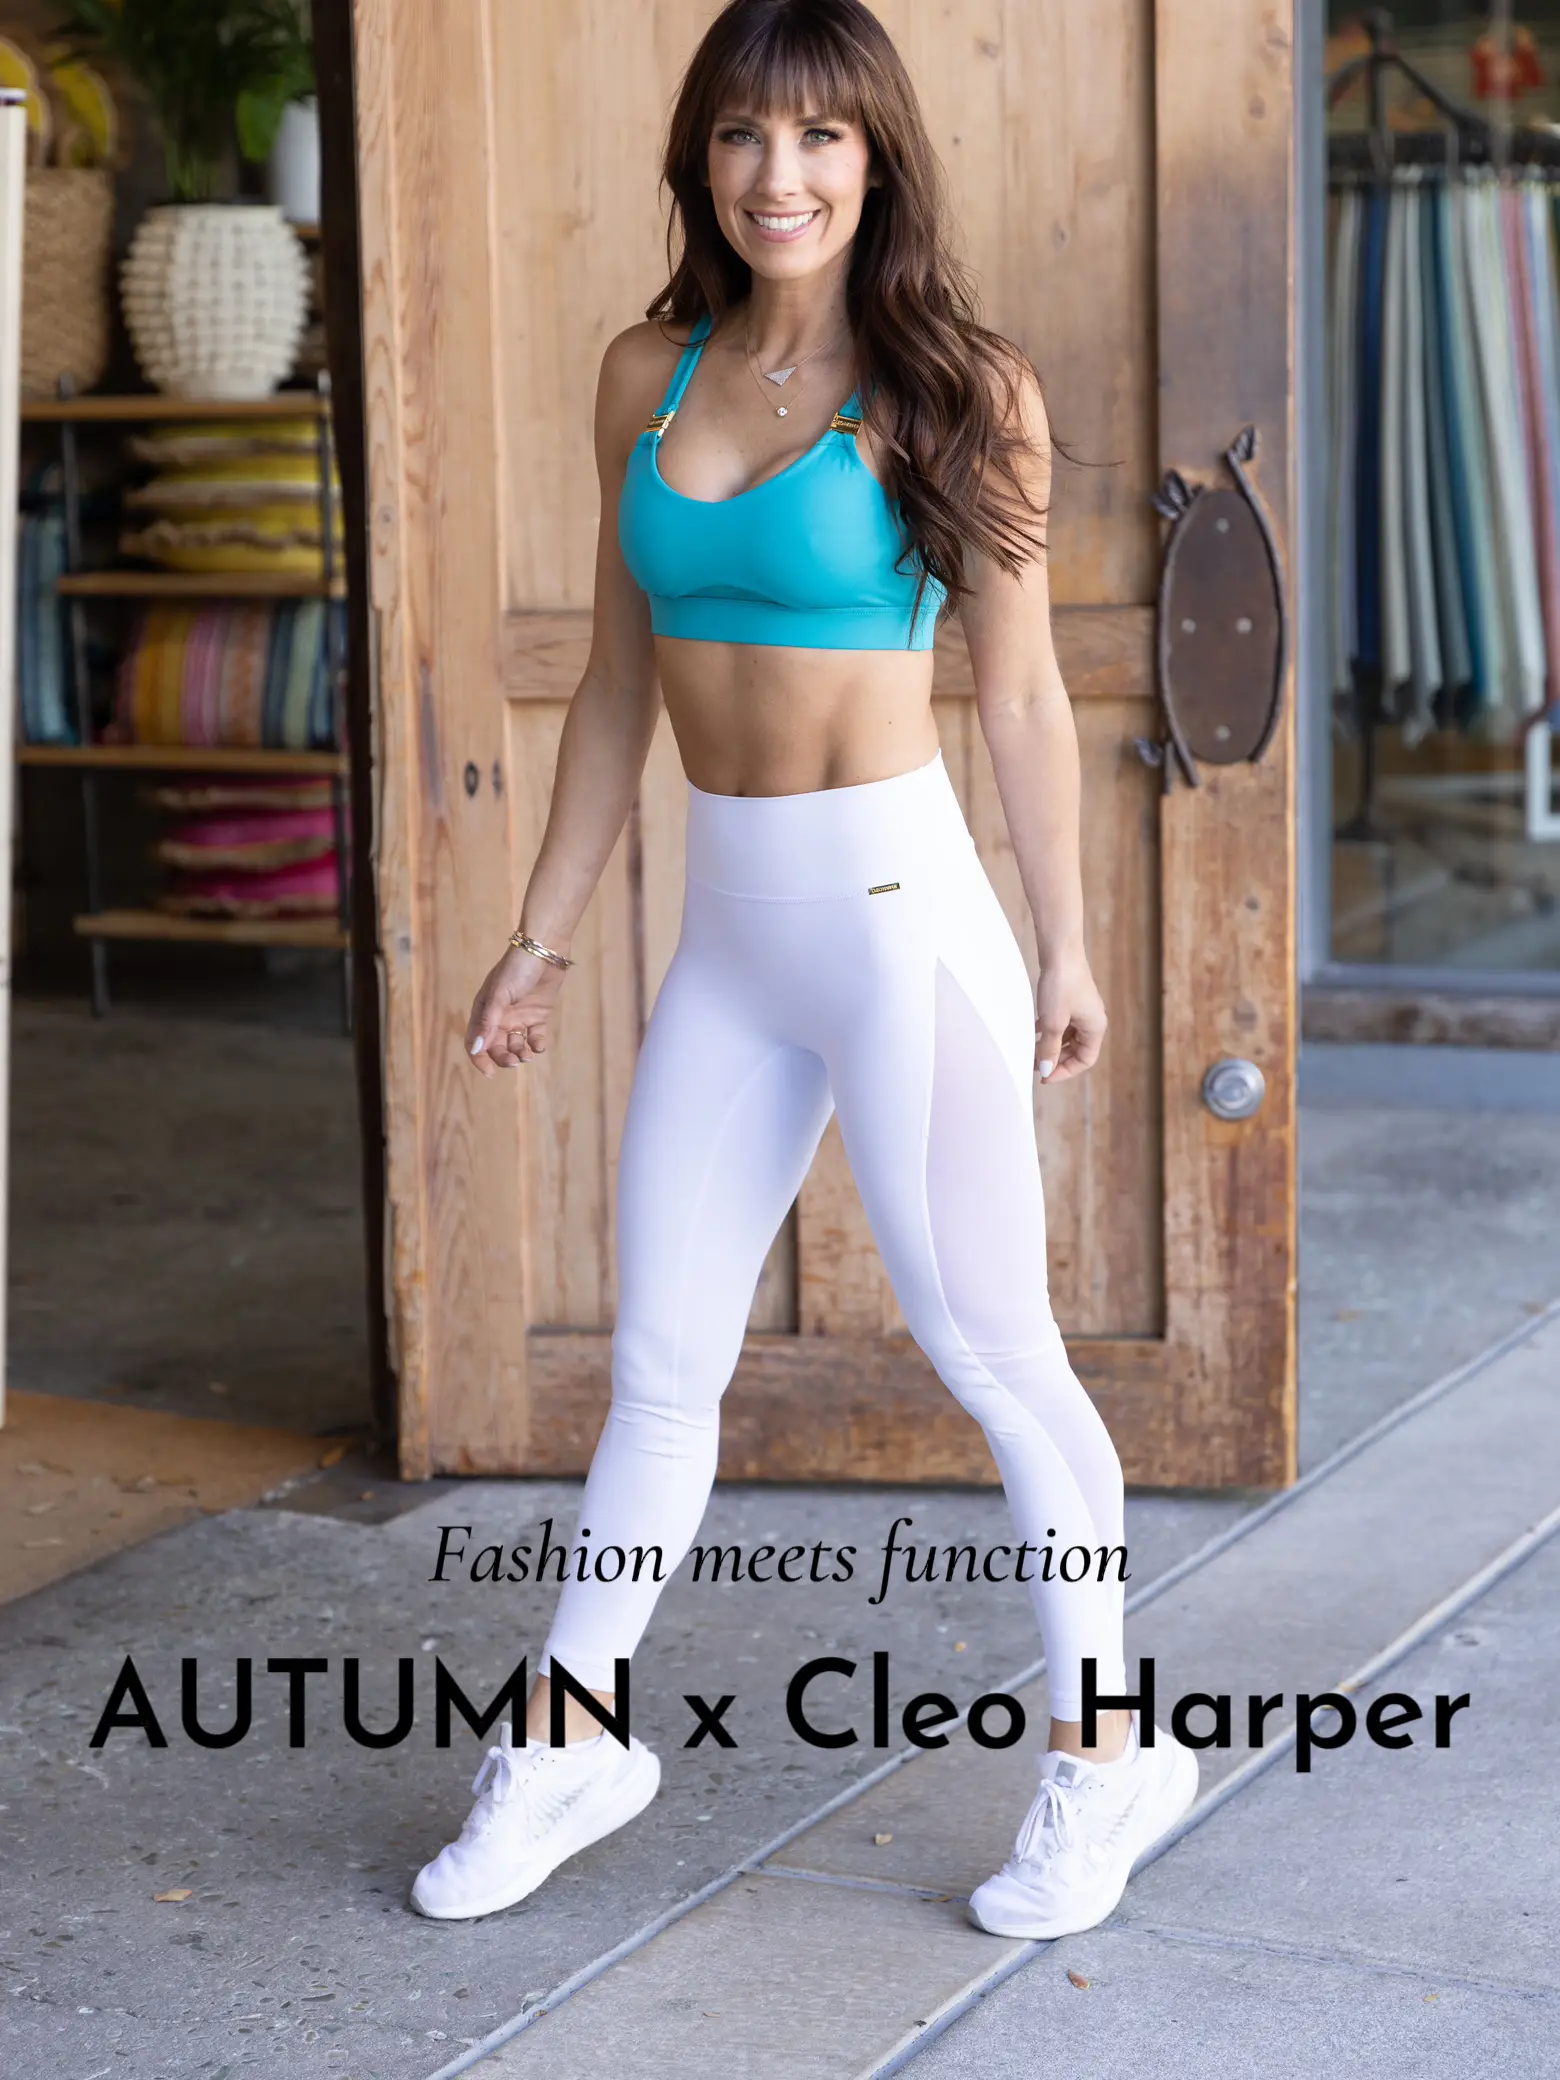 AUTUMN x Cleo Harper, Gallery posted by AutumnCalabrese